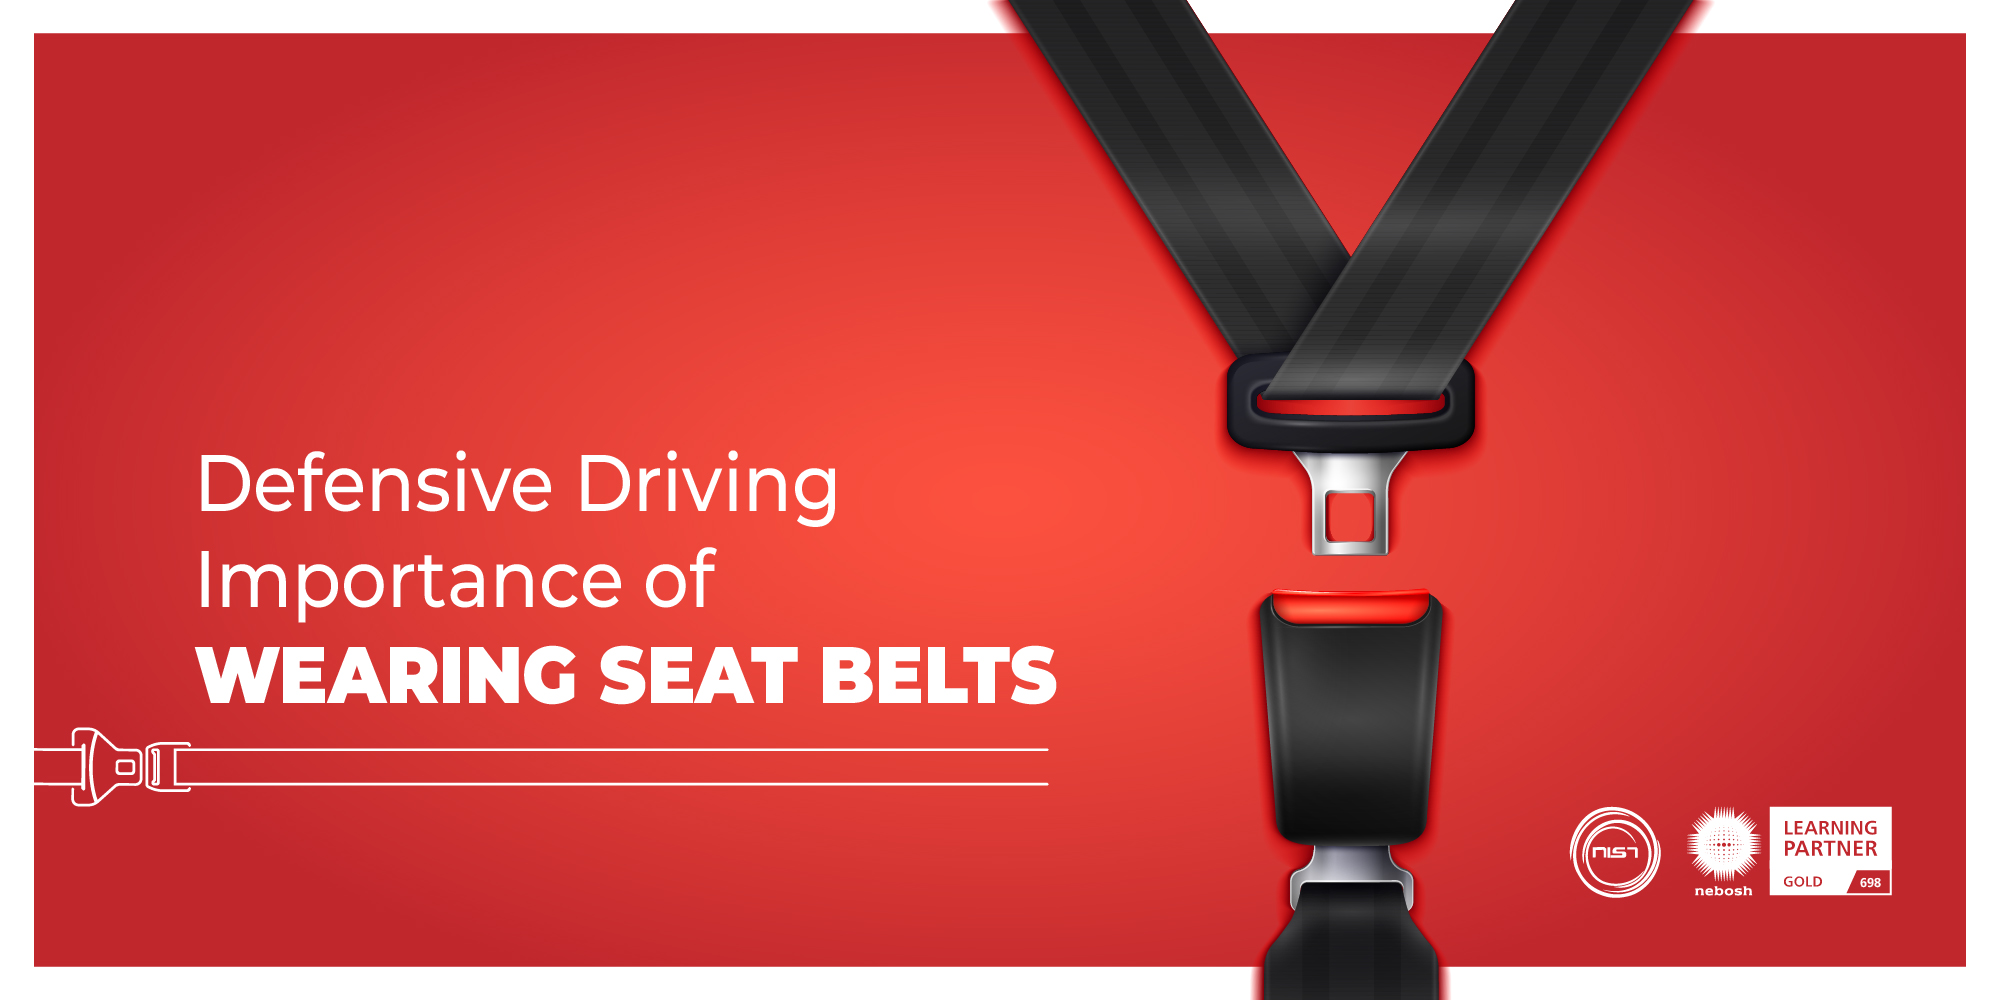 The Risk of Not Wearing a Seat Belt